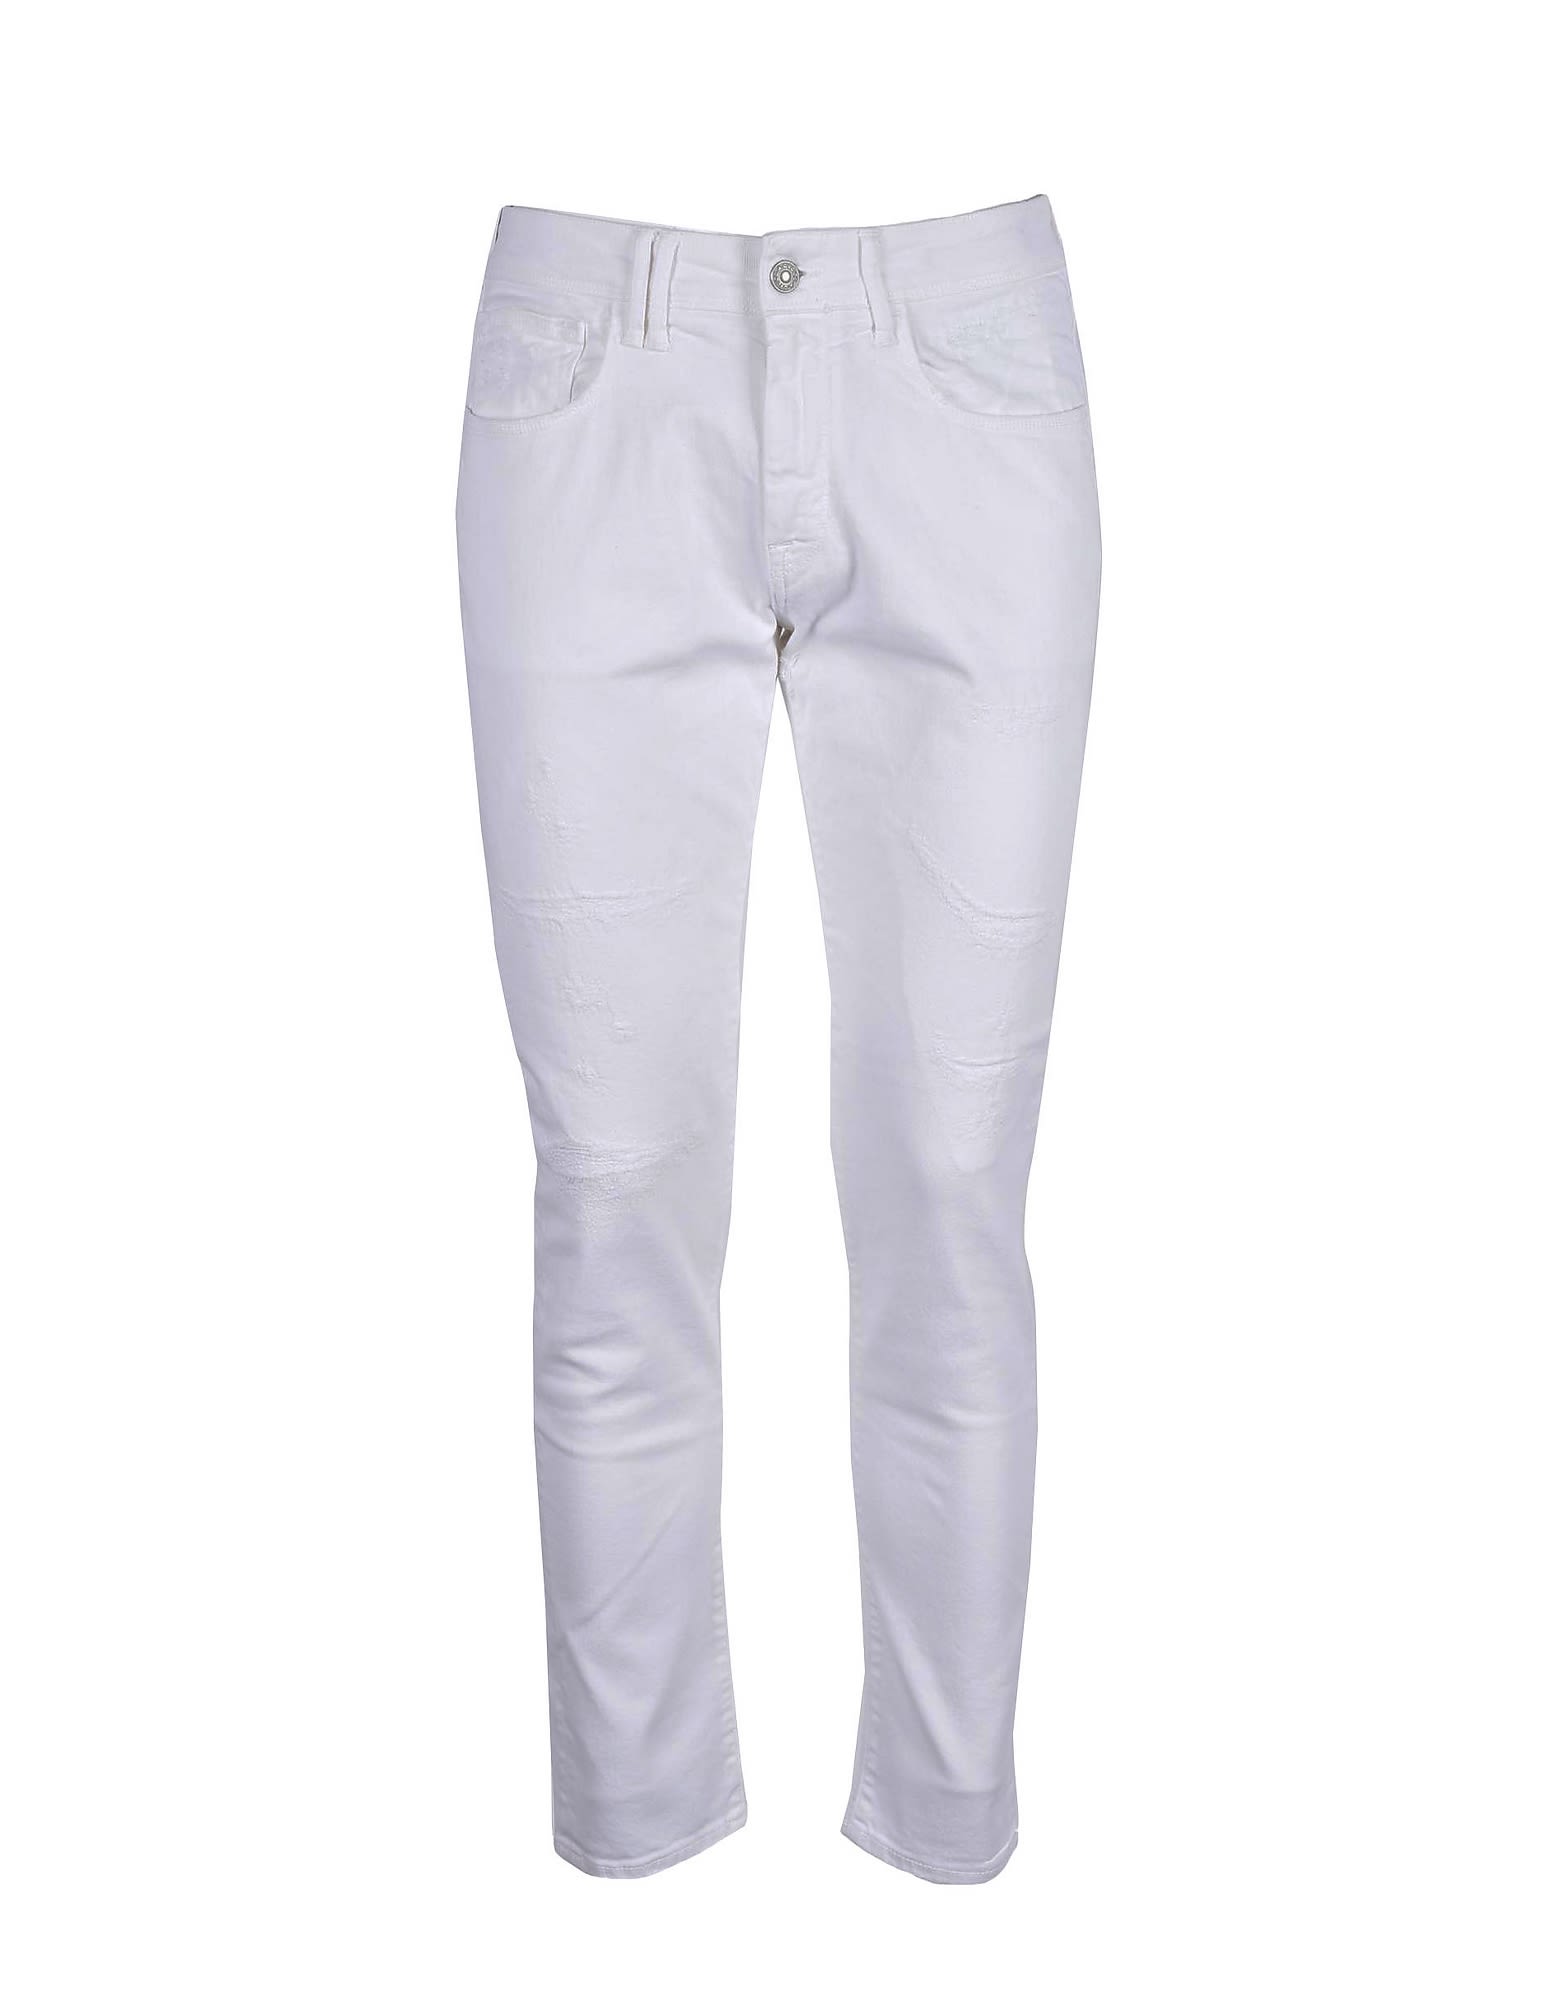 Cycle Mens White Jeans